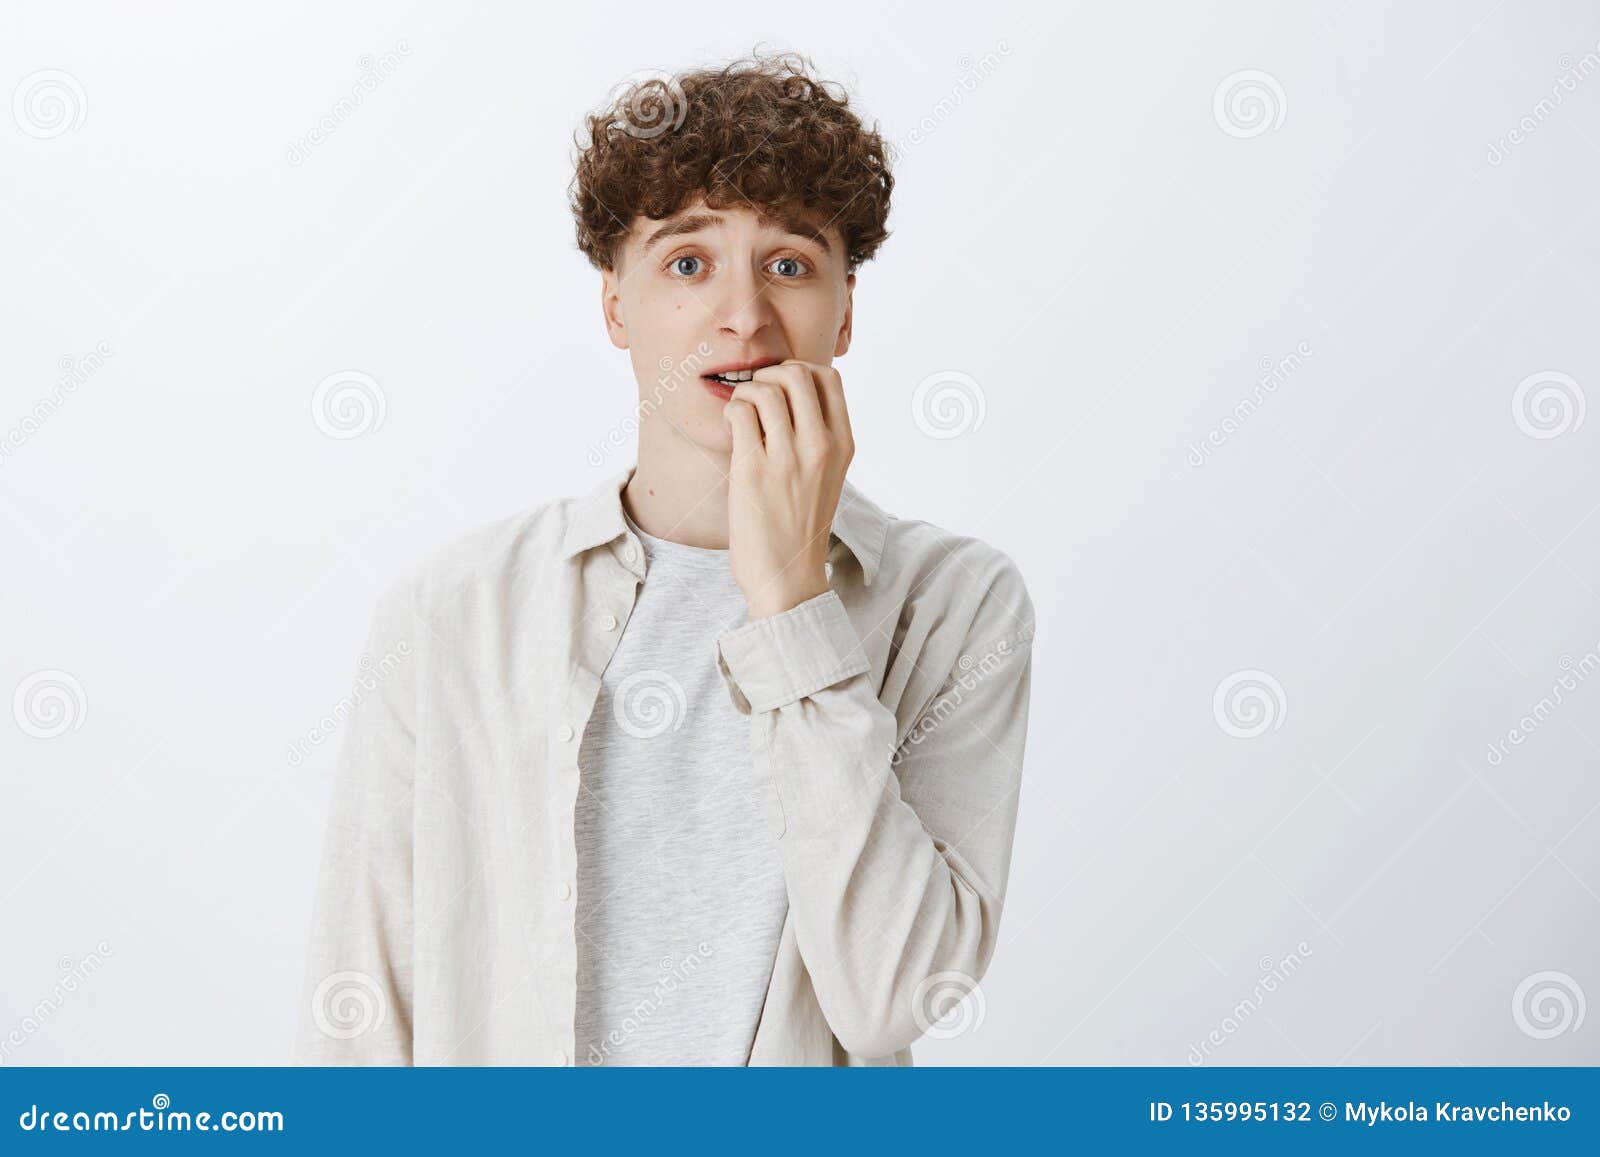 Anxious and Insecure Young Teenage Guy with Curly Hair in Shirt Biting  Fingernails Looking Unsure and Nervous As Stock Photo - Image of emotional,  handsome: 135995132